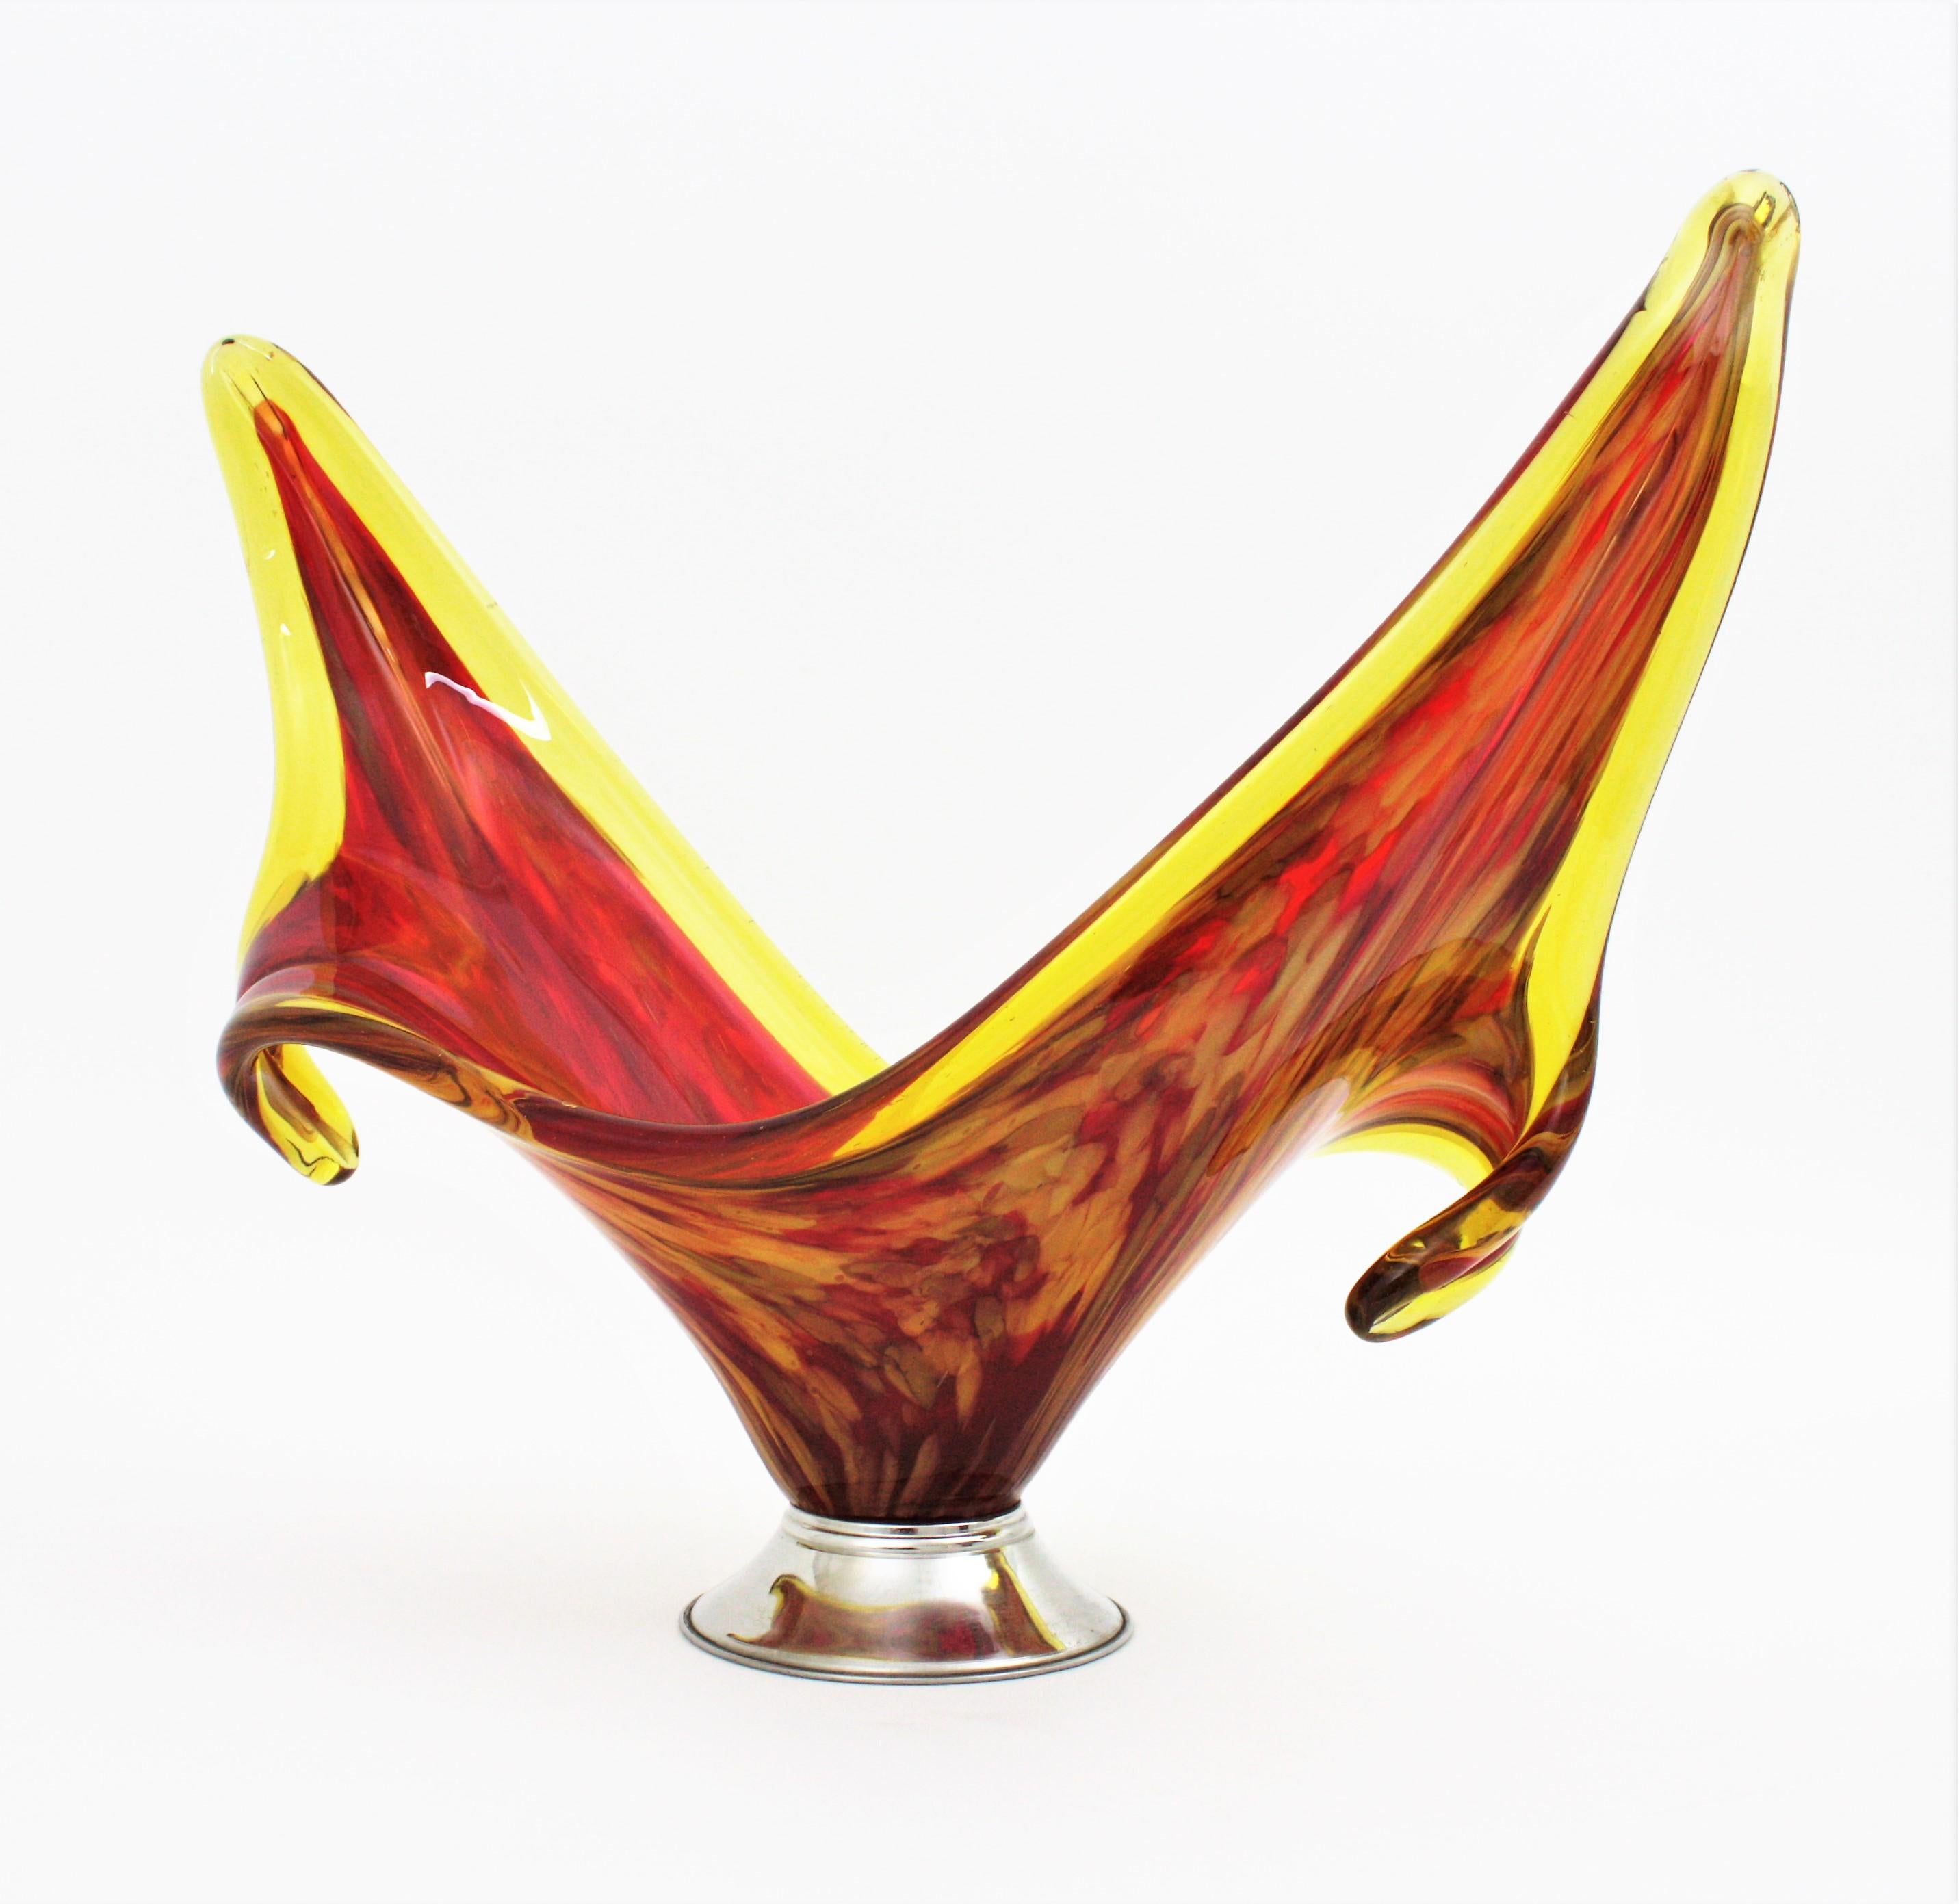 Mid-Century Modernist Sommerso Murano centerpiece vase with organic design in yellow and red hand blown Glass, Italy, 1960s.
This elegant Murano centerpiece is made combining yellow and red glass with a rim in yellow glass.
It has an eye-catching